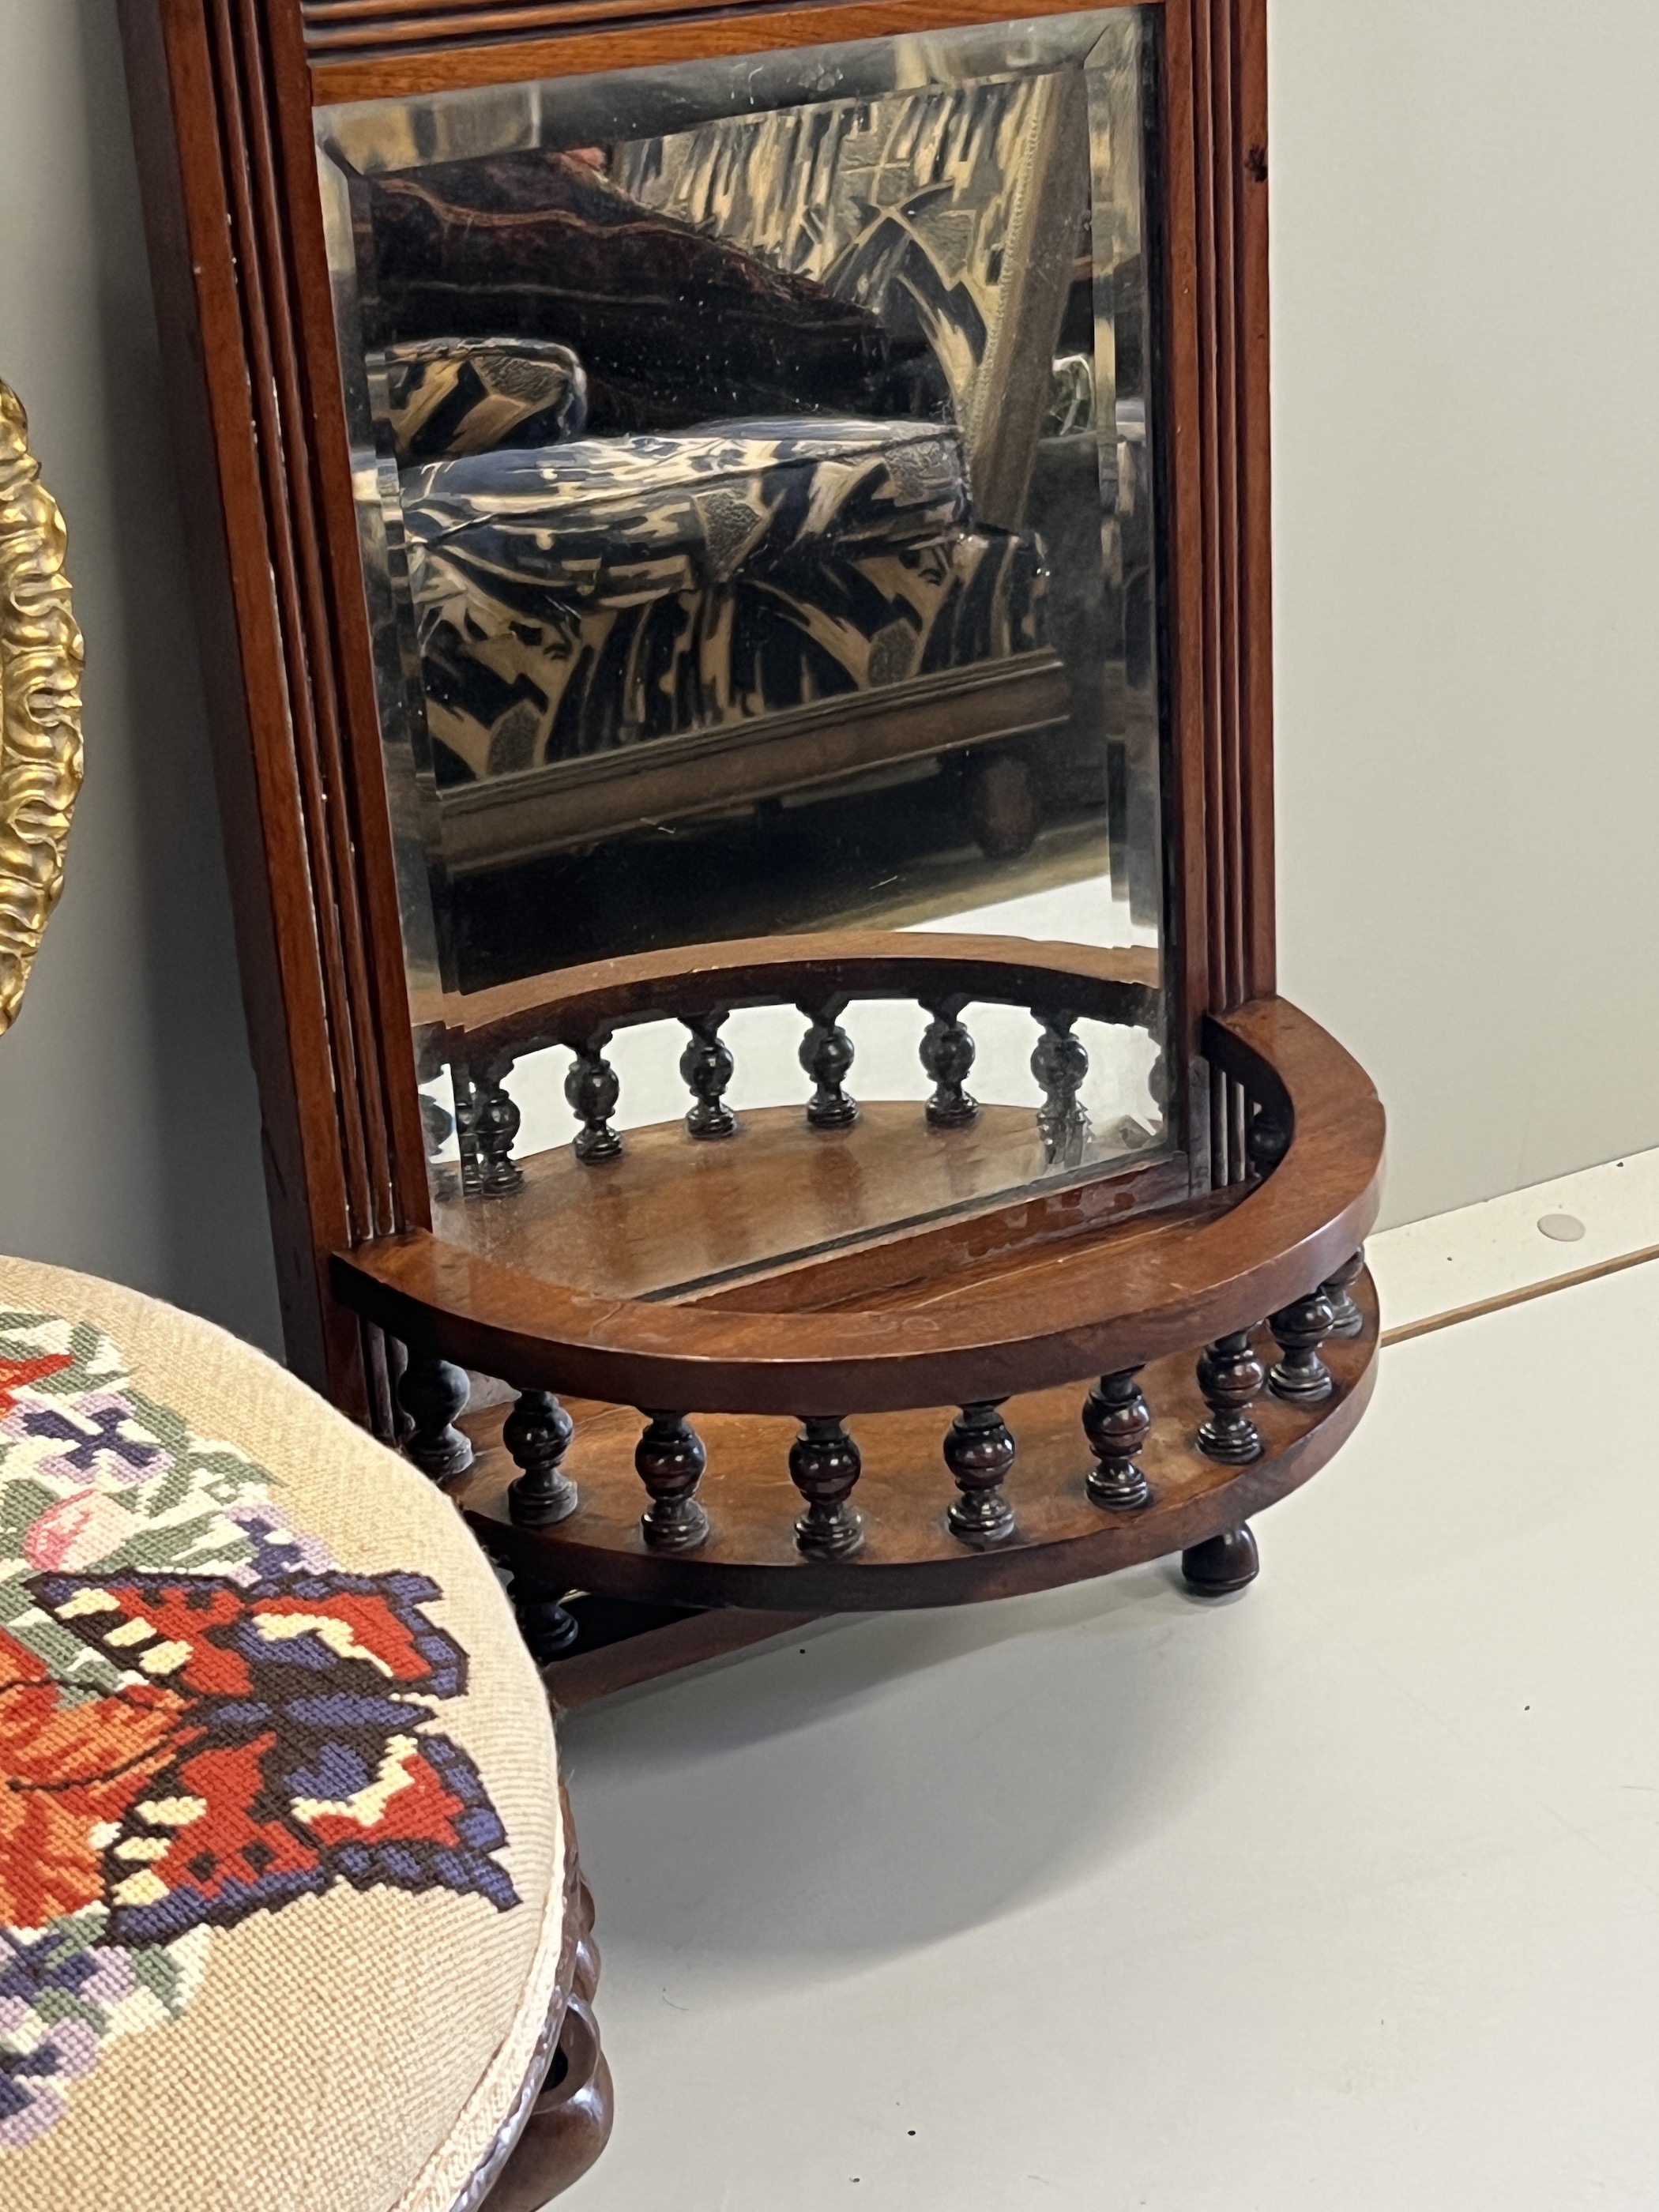 A late Victorian mahogany bowfront mirrored wall bracket, height 63cm, a Victorian circular footstool and a convex wall mirror